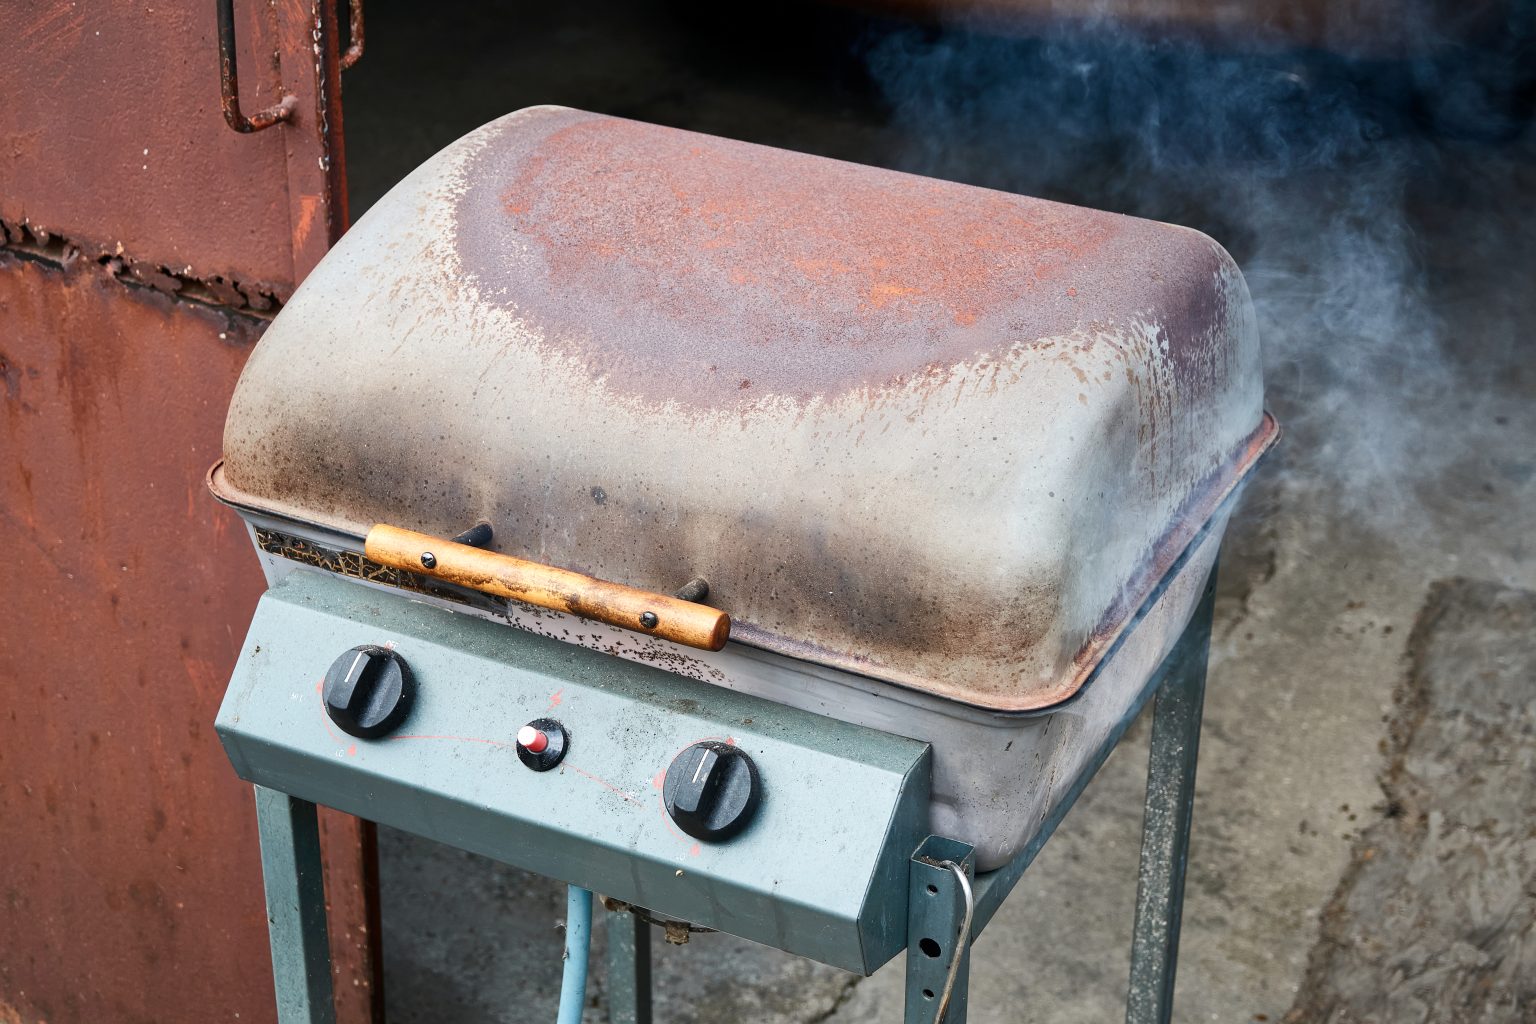 Should You Replace Your Gas Grill With a Pellet Grill?